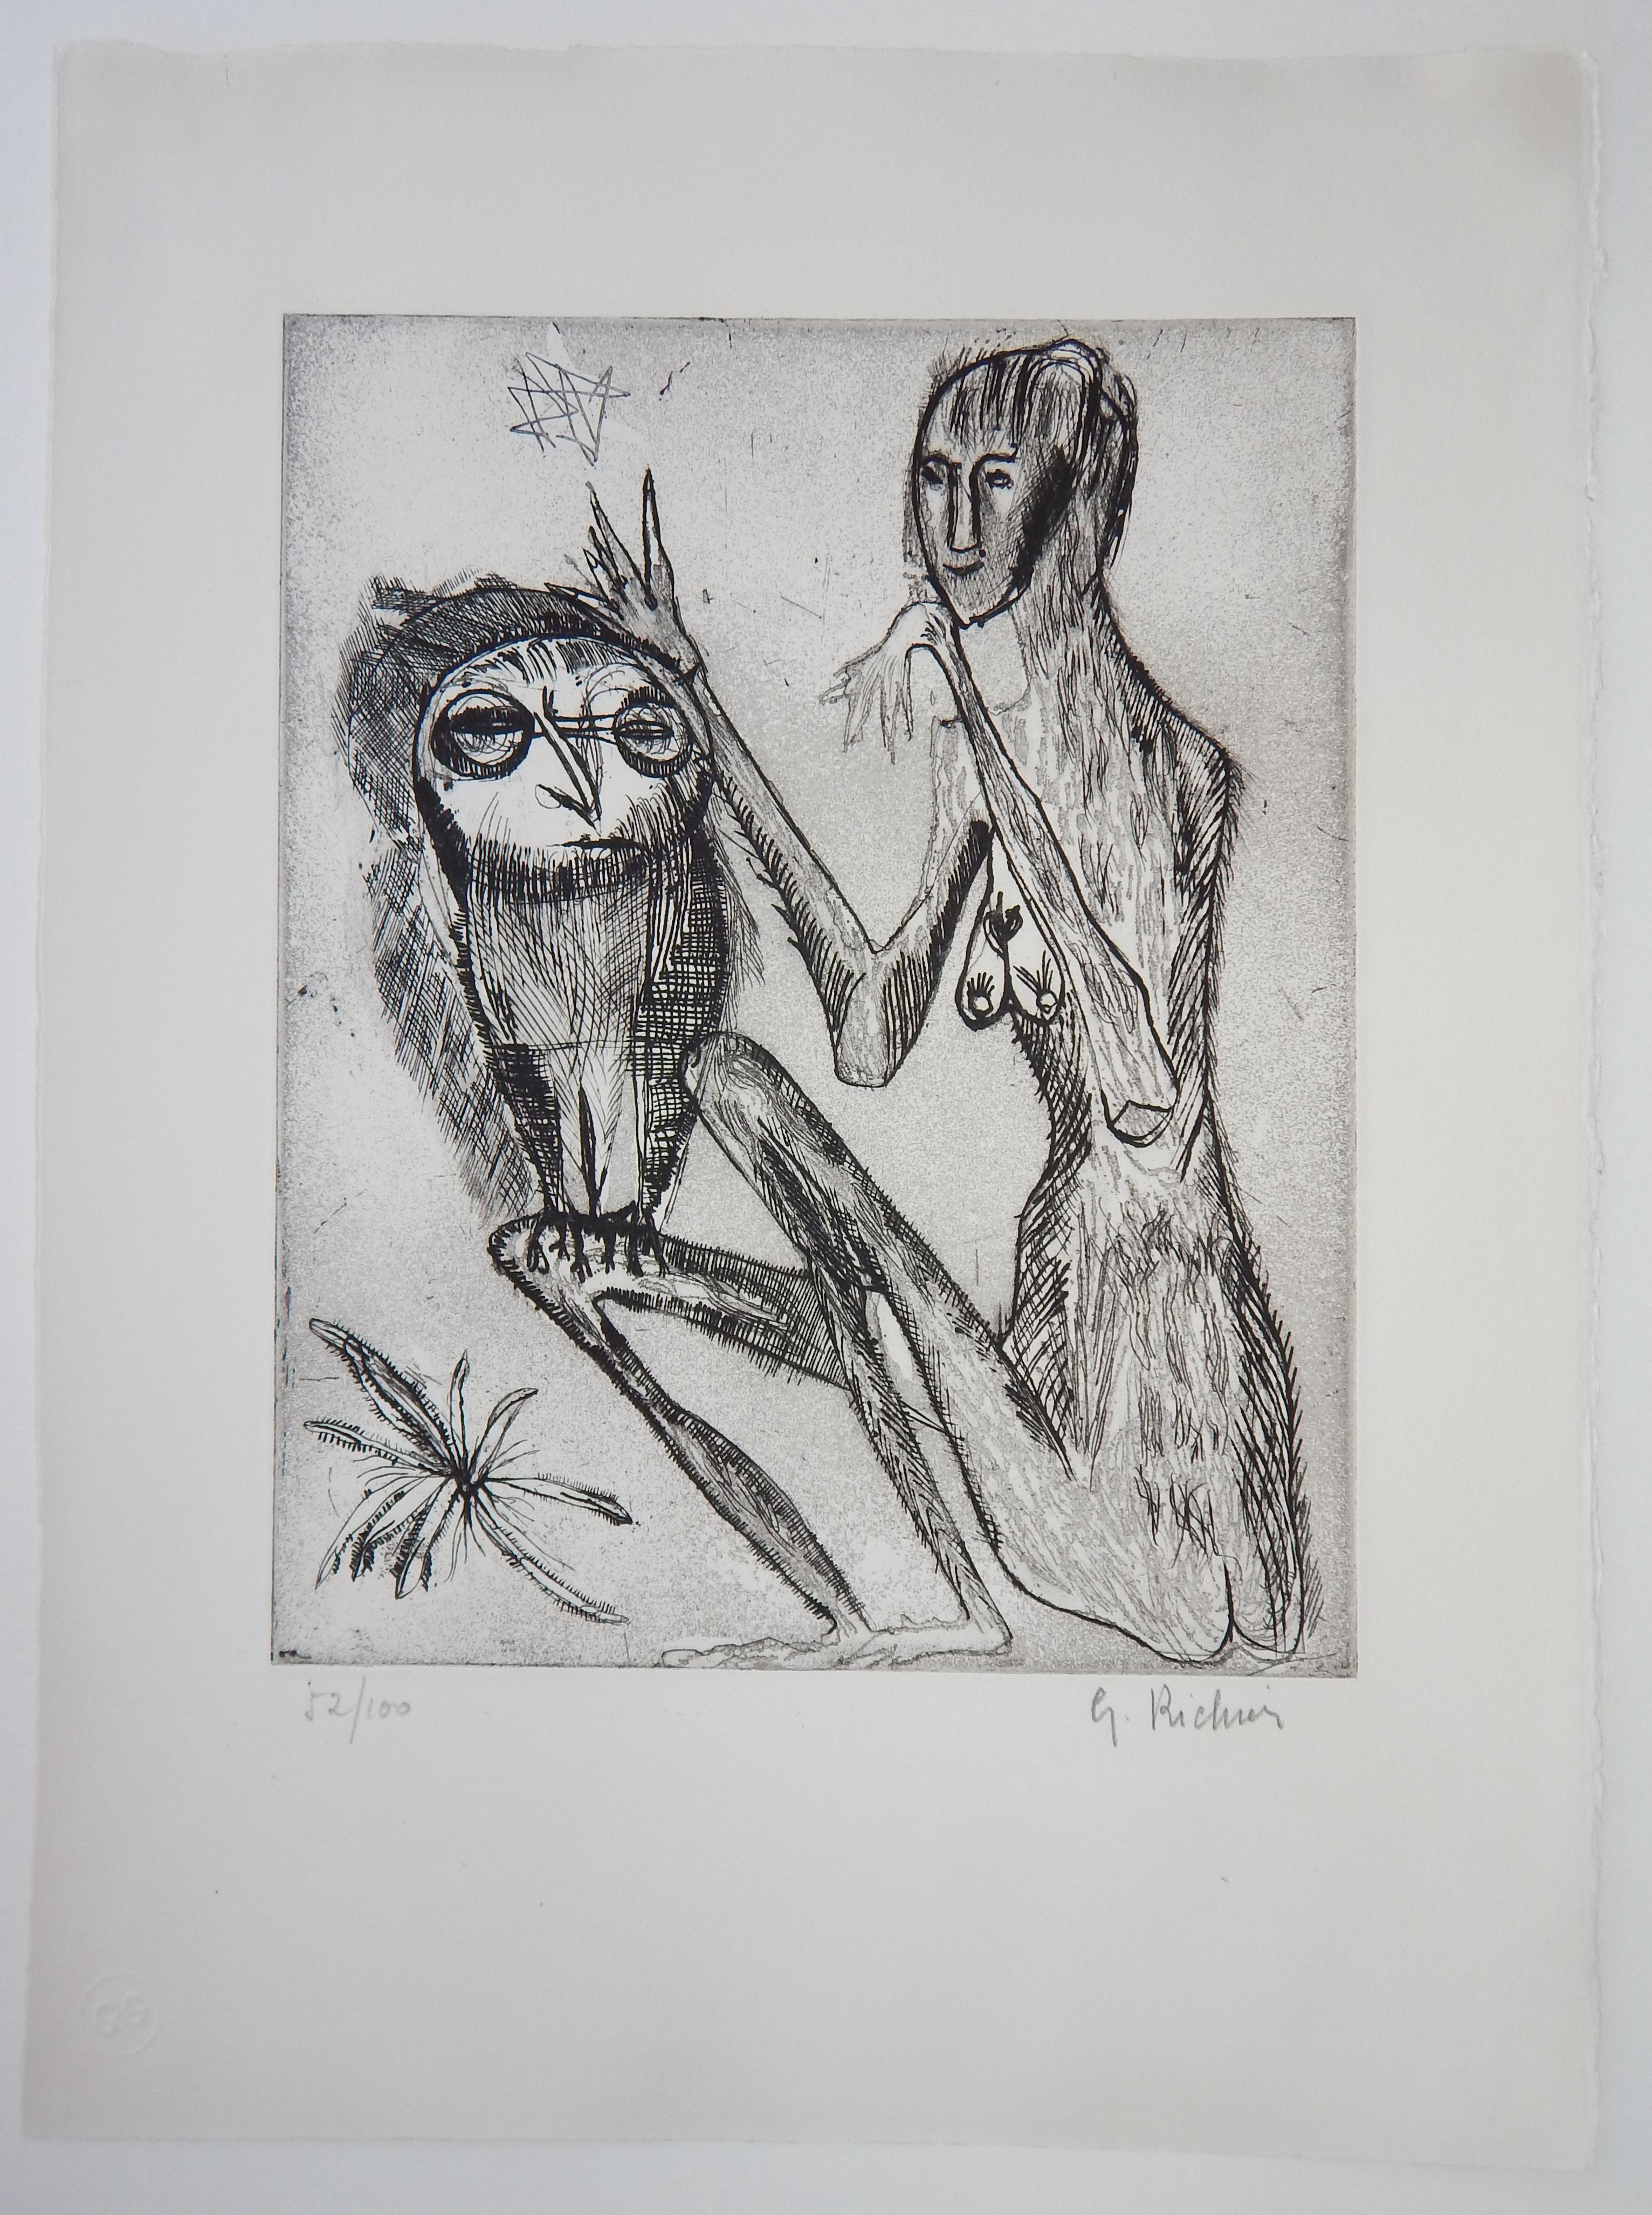 Germaine Richier (1902-1959) etching
Richier was a French artist noted for making animal and insect figures
with human attributes.
Etching, figure and owl, circa 1950.
Unframed, matted archivally in a two ply museum mat.
Pencil signed lower